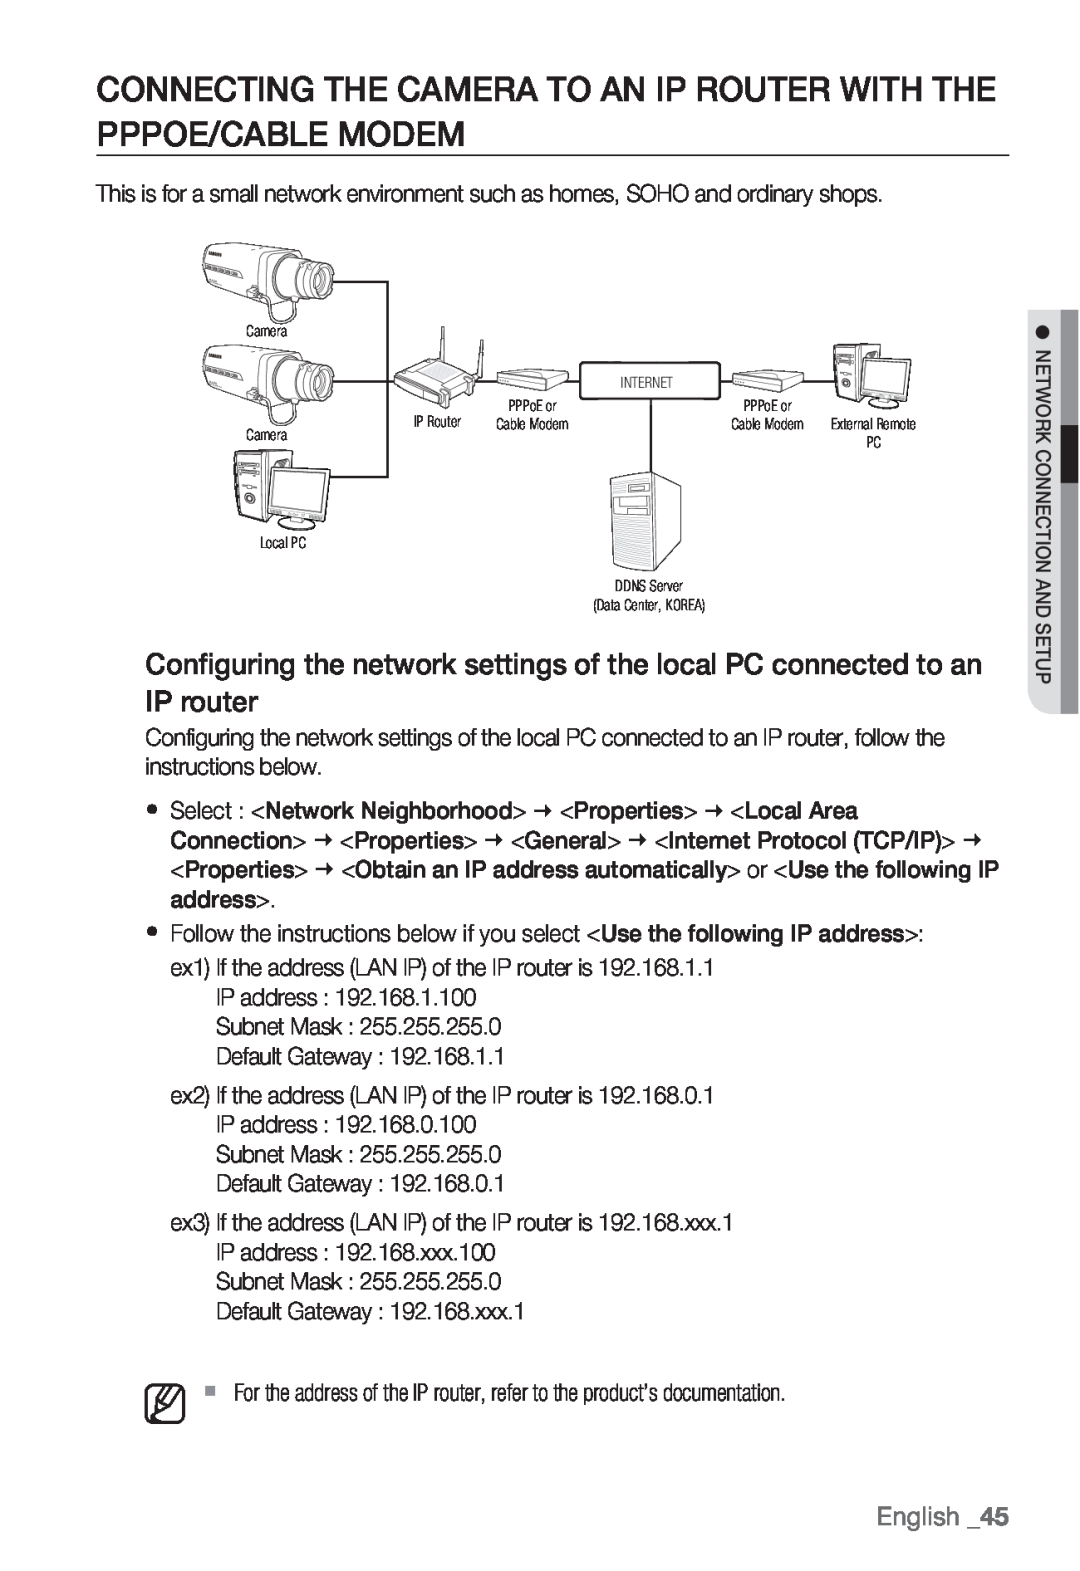 Samsung SNV-5080, SNB-5000, SND-5080F, SNB5000 Connecting The Camera To An Ip Router With The Pppoe/Cable Modem, English 